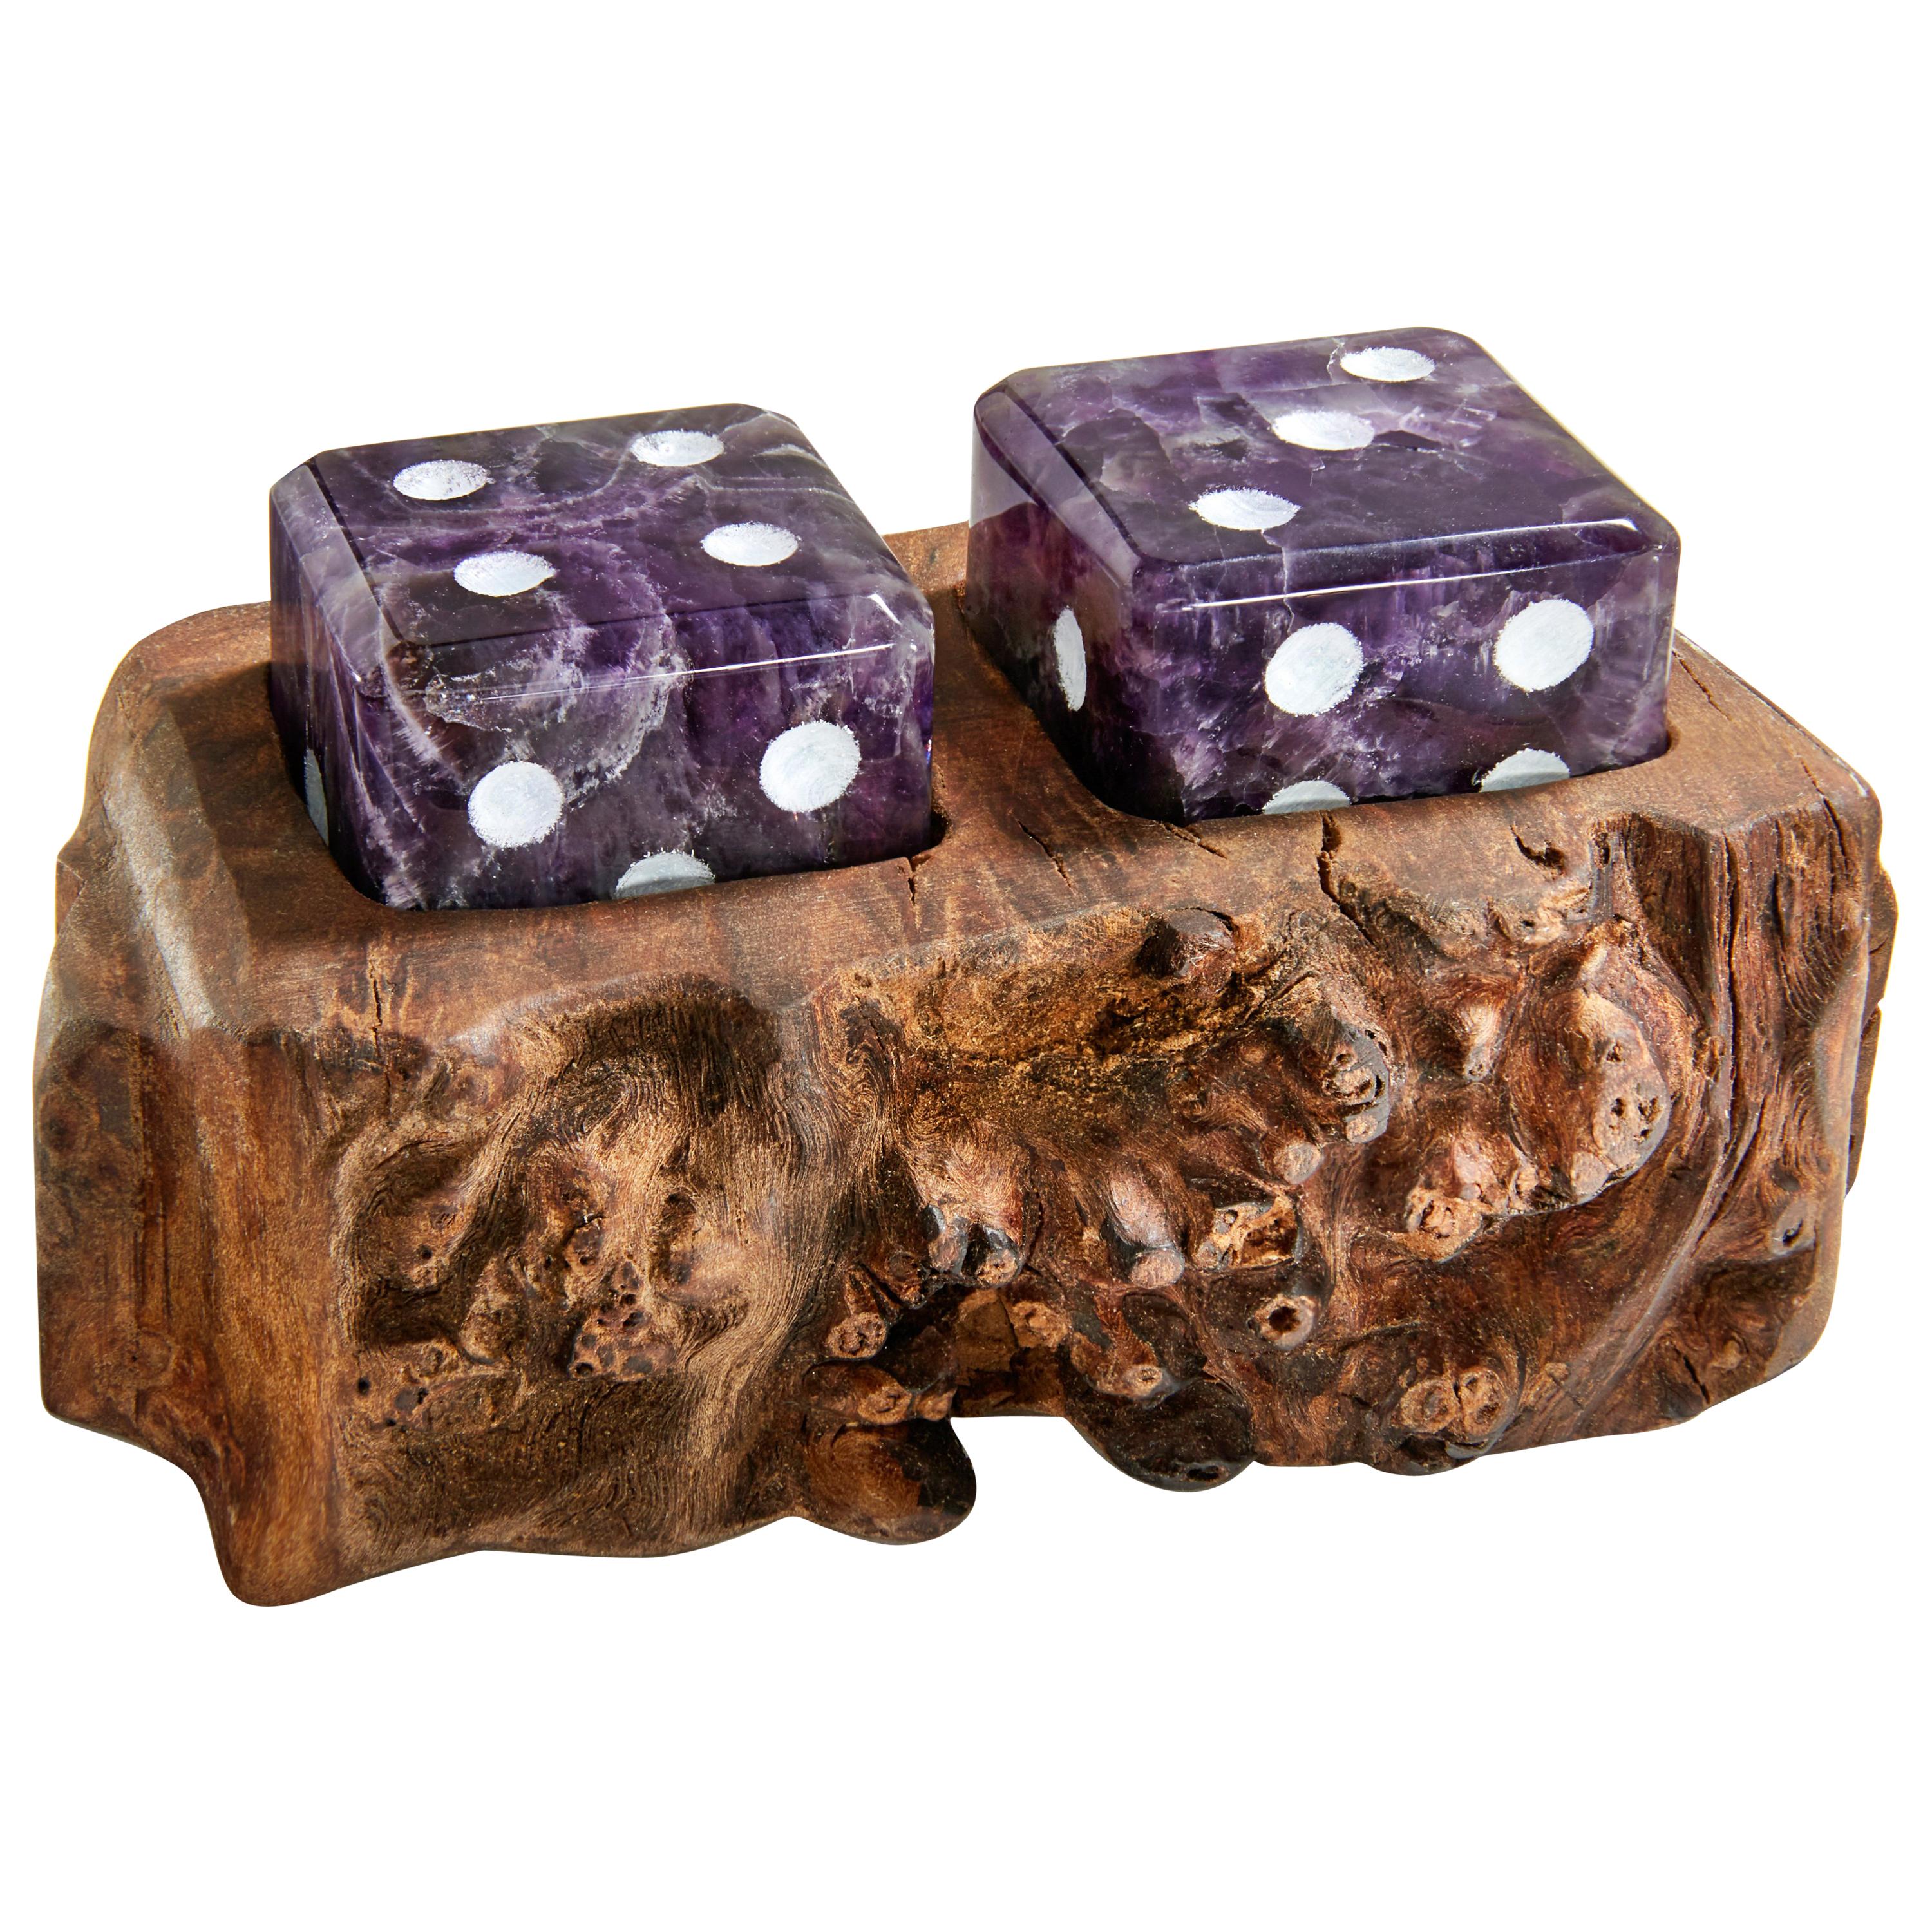 Afora Dice Set in Amethyst without Wood Holder by Anna Rabinowitz